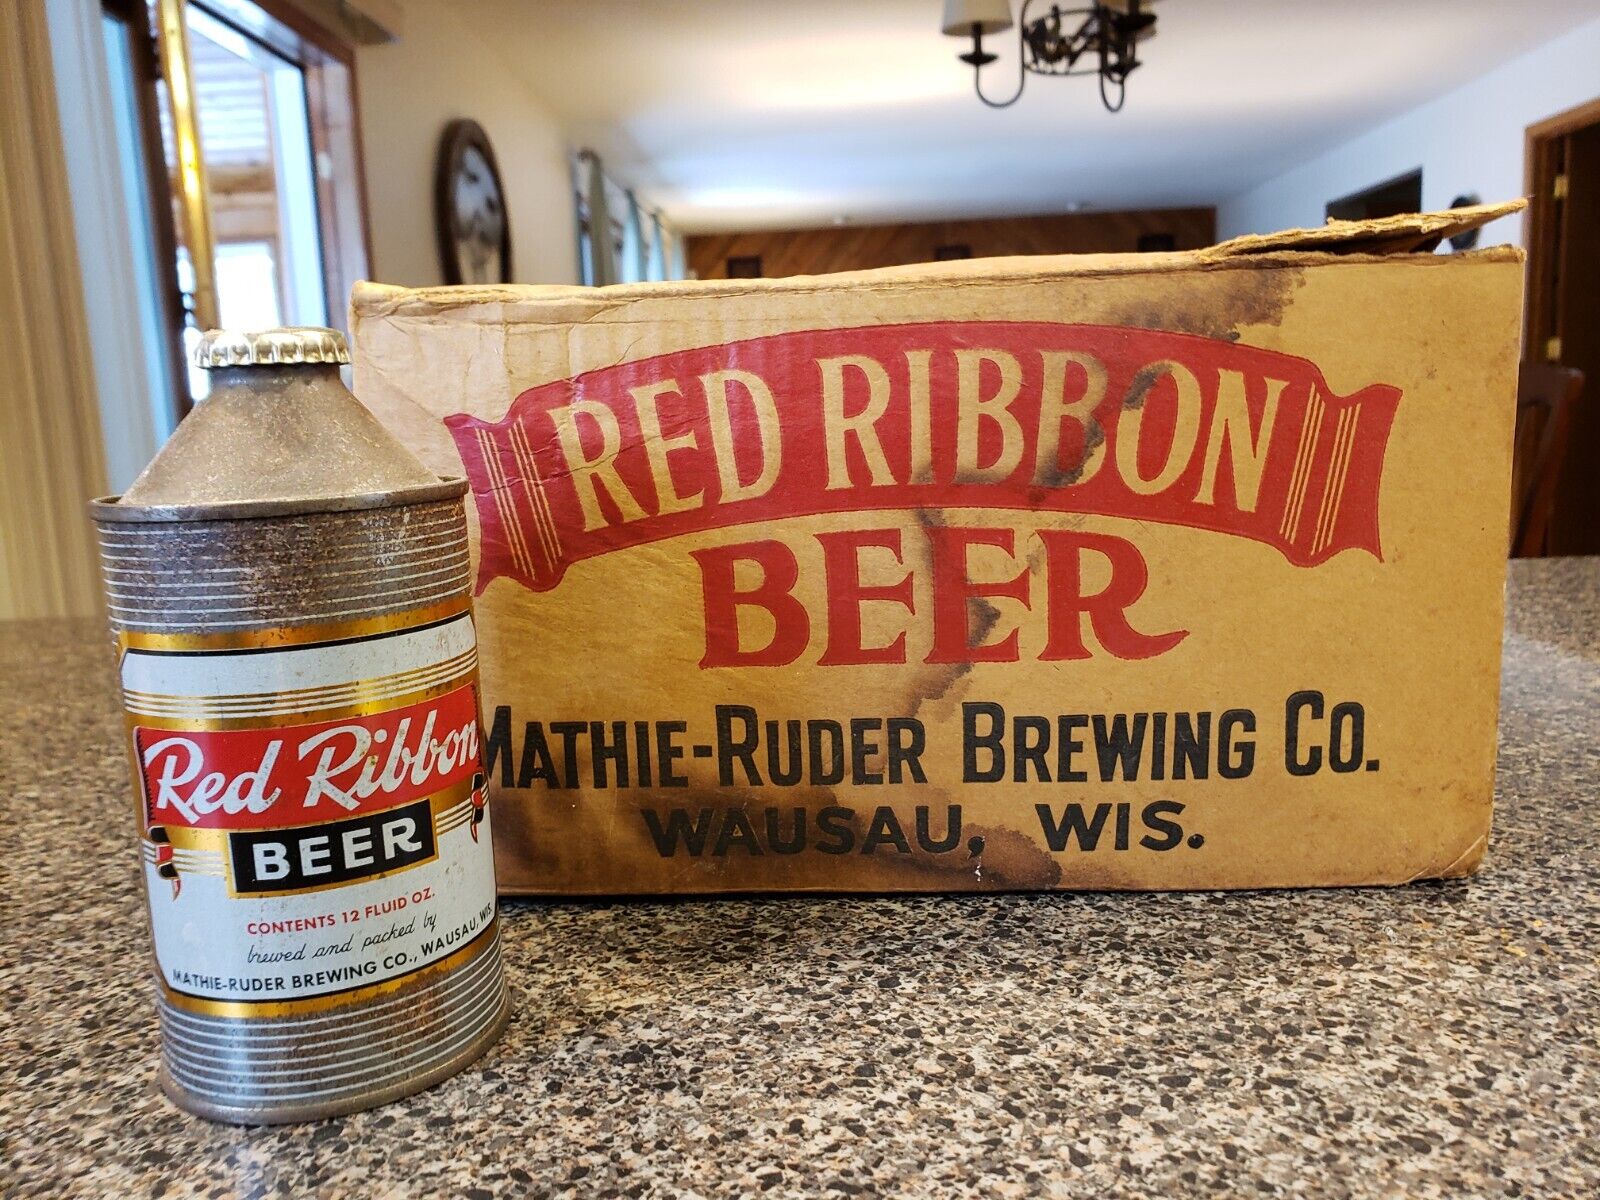 Wausau Mathie-Ruder Brewing Co CONE TOP Red Ribbon Beer Case 1953-55 ULTRA RARE